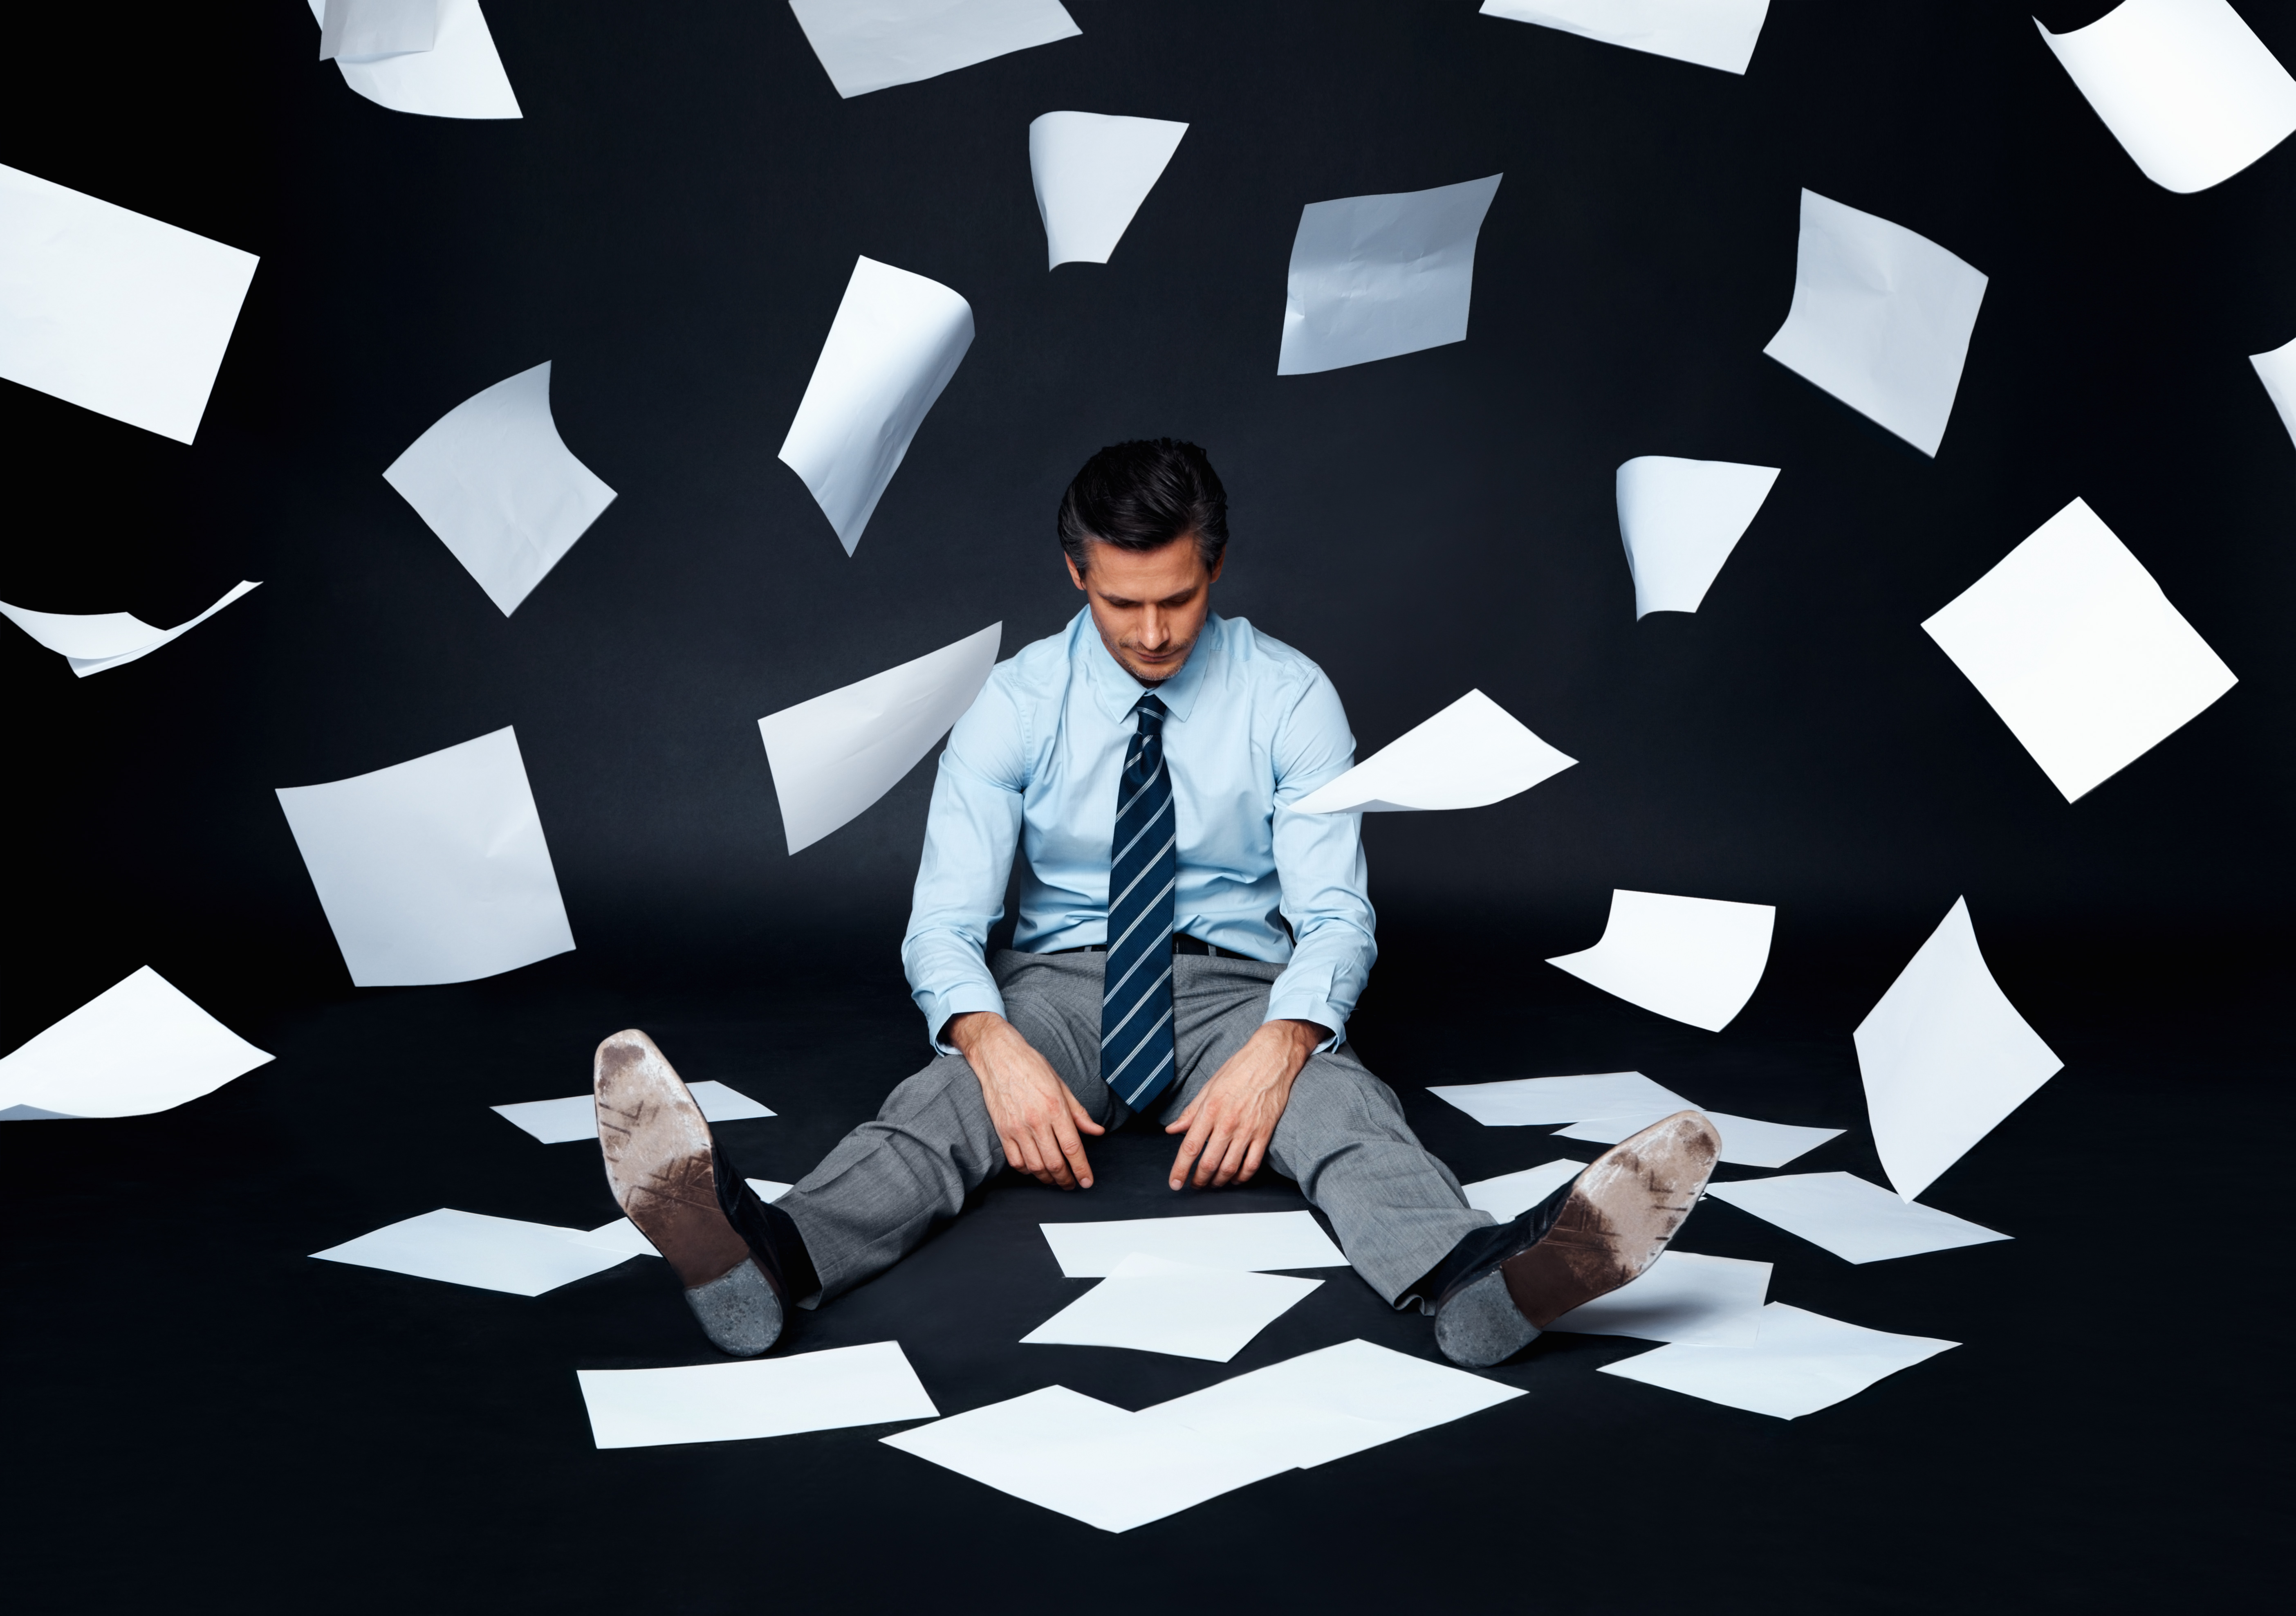 Stressed business man sitting on floor with papers falling around him